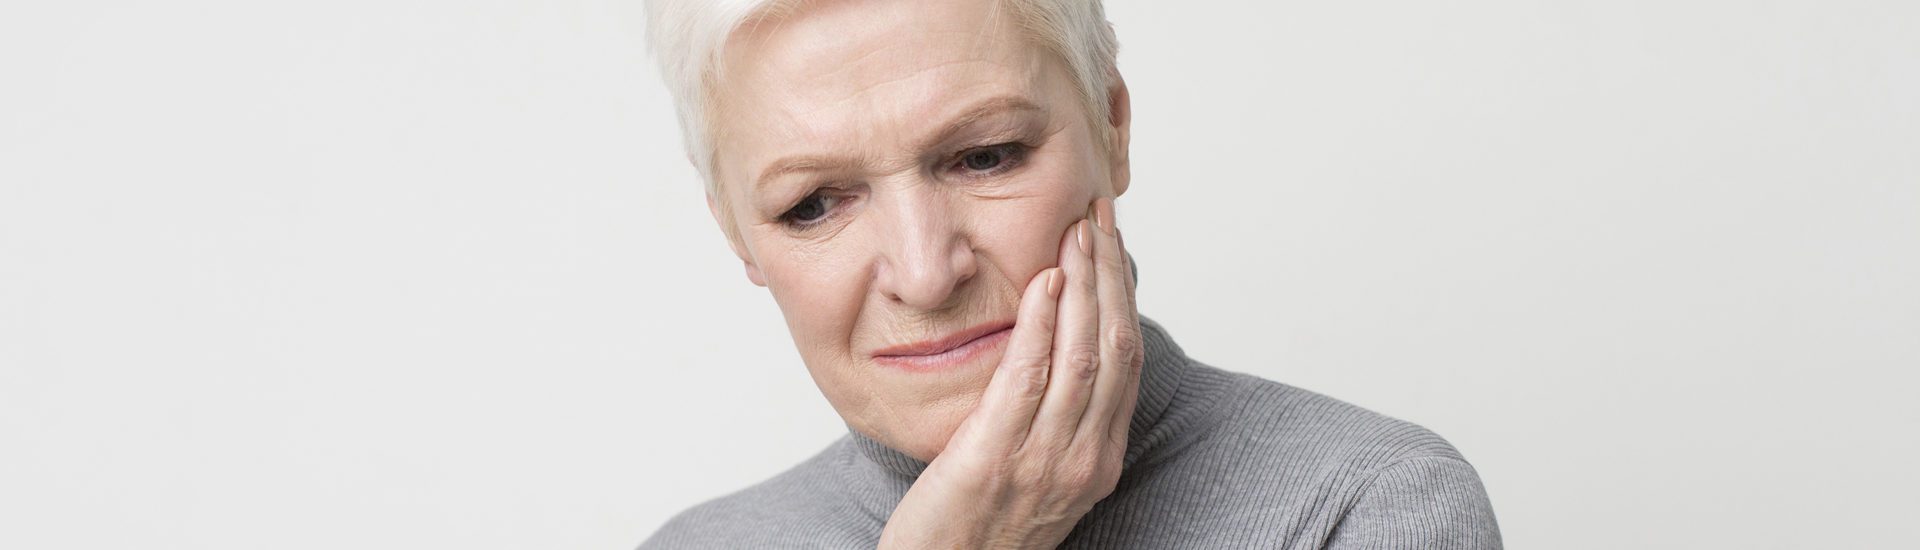 Terrible Jaw pain required TMJ Treatment